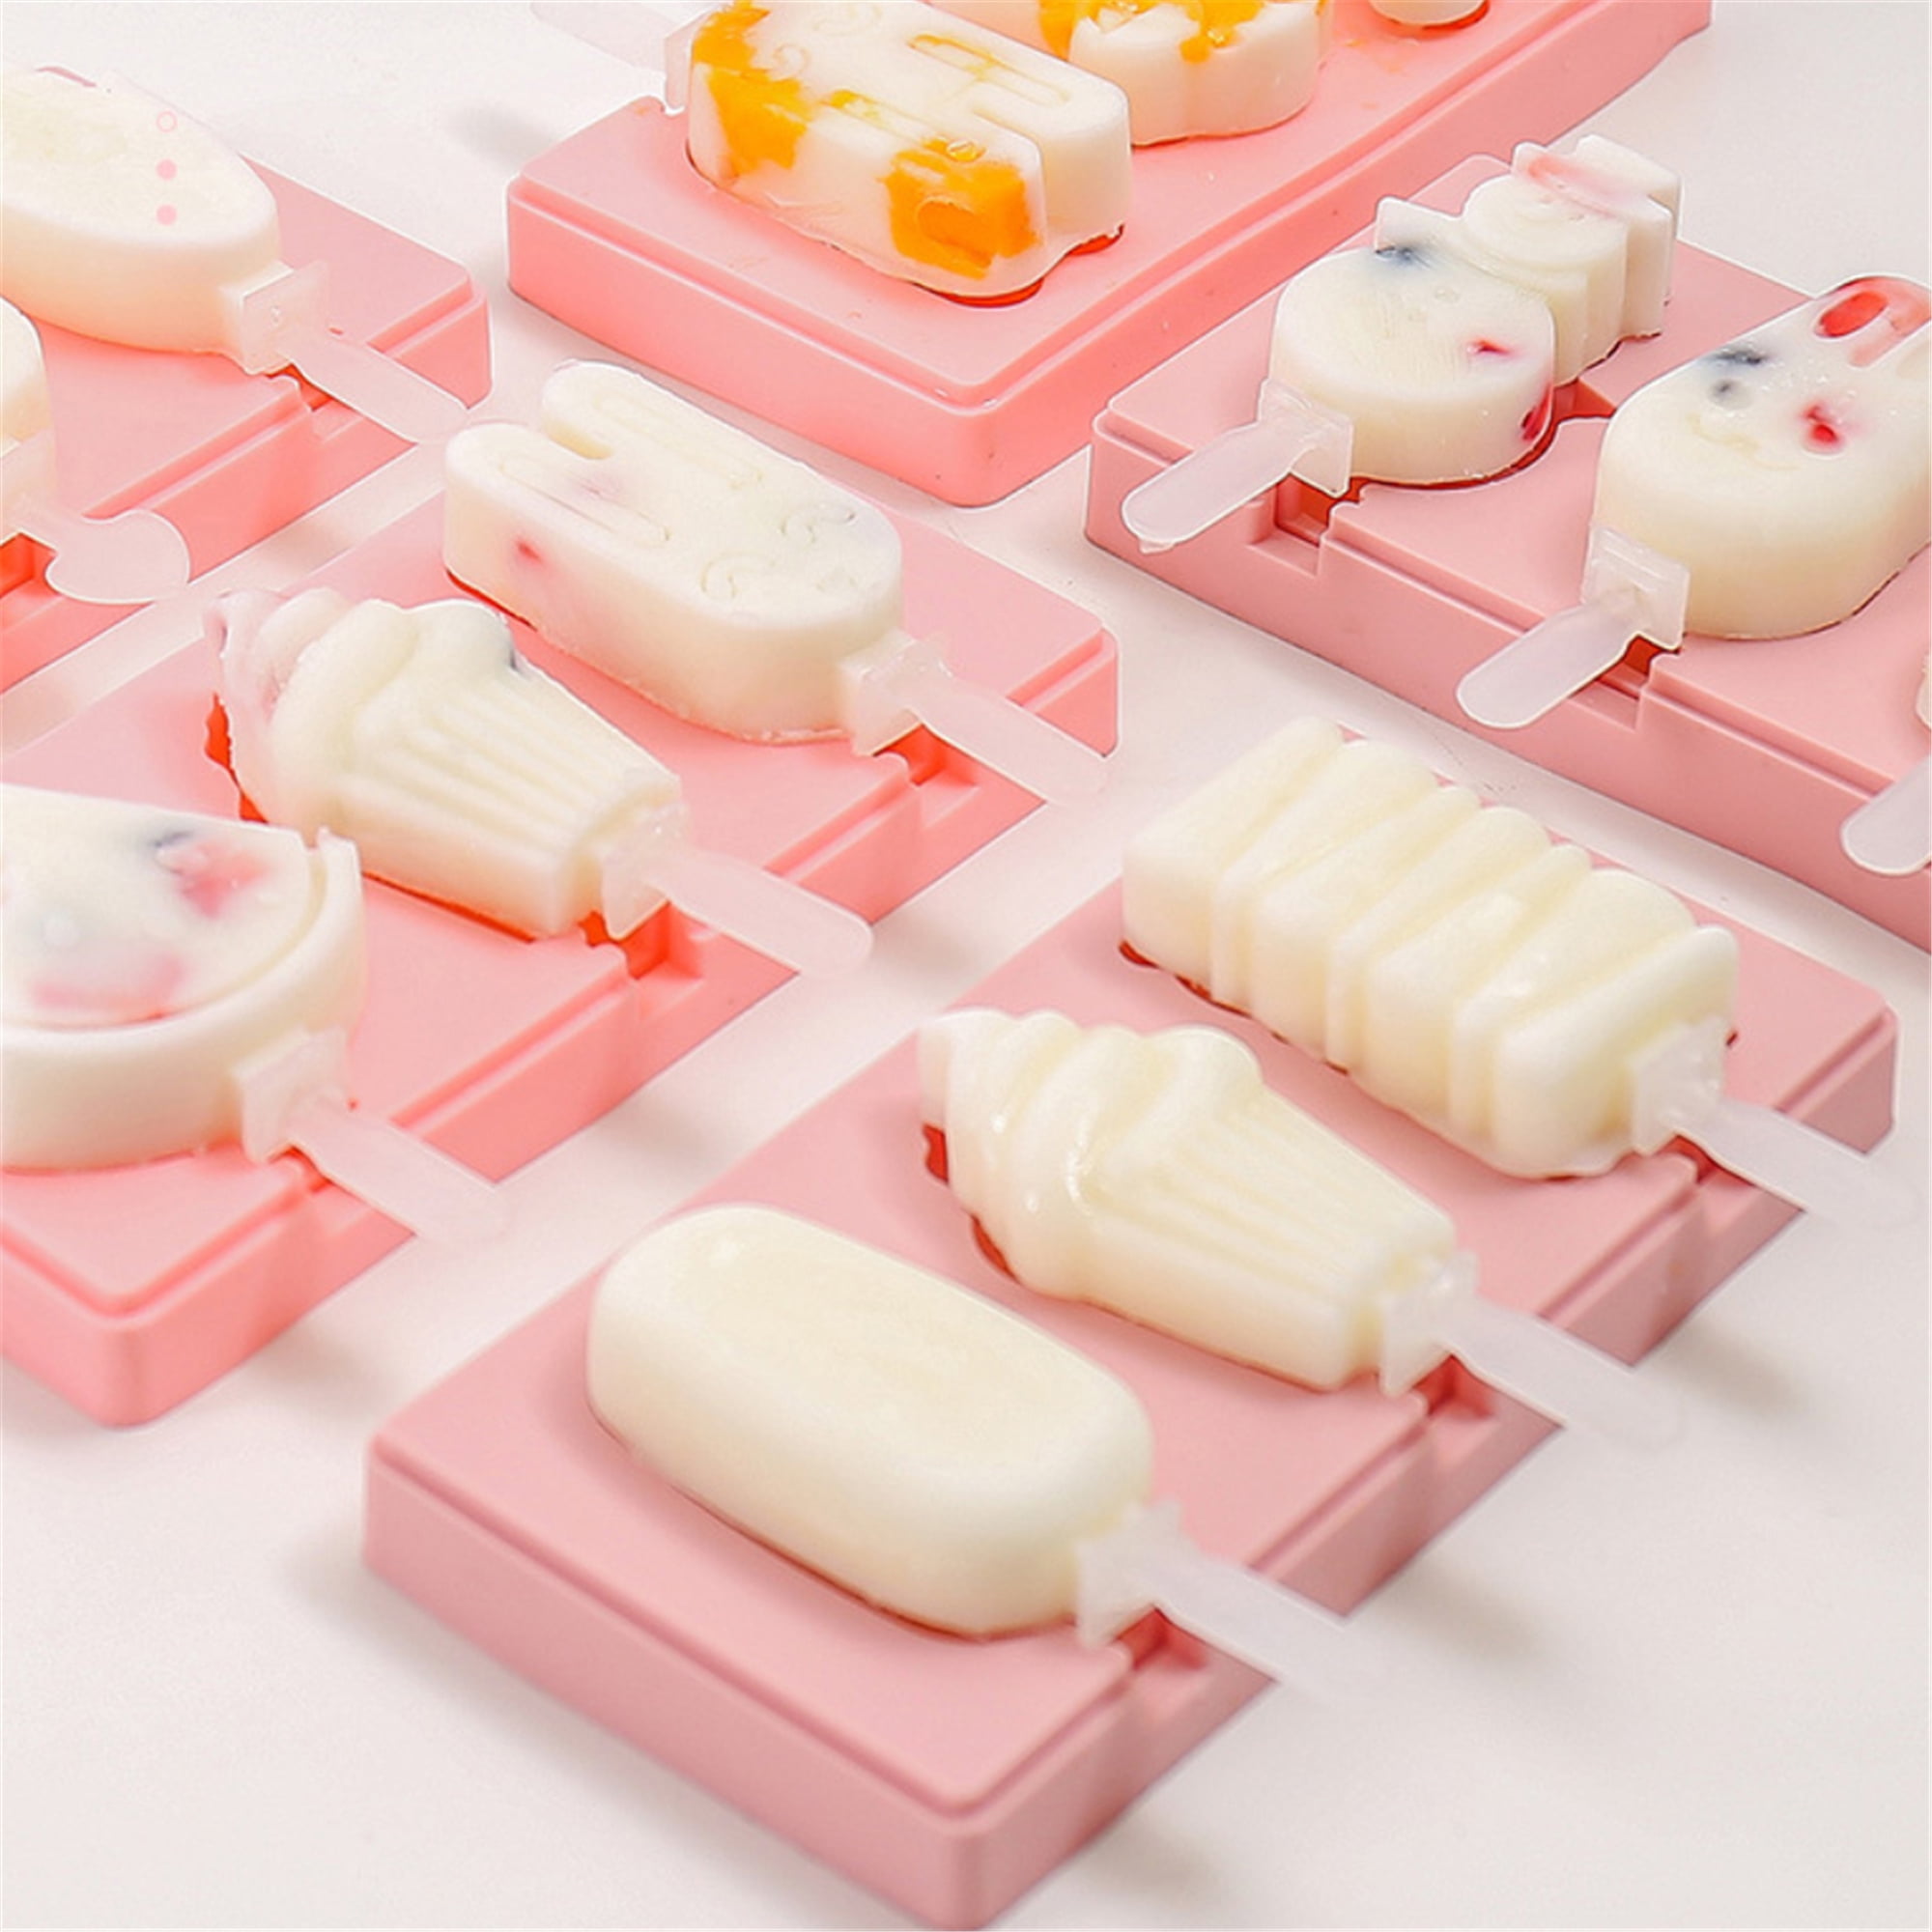 Details about   Silicone Ice Cream Cake Mold Ice Lolly Baking freeze Mould Tray DIY Kitchen Tool 